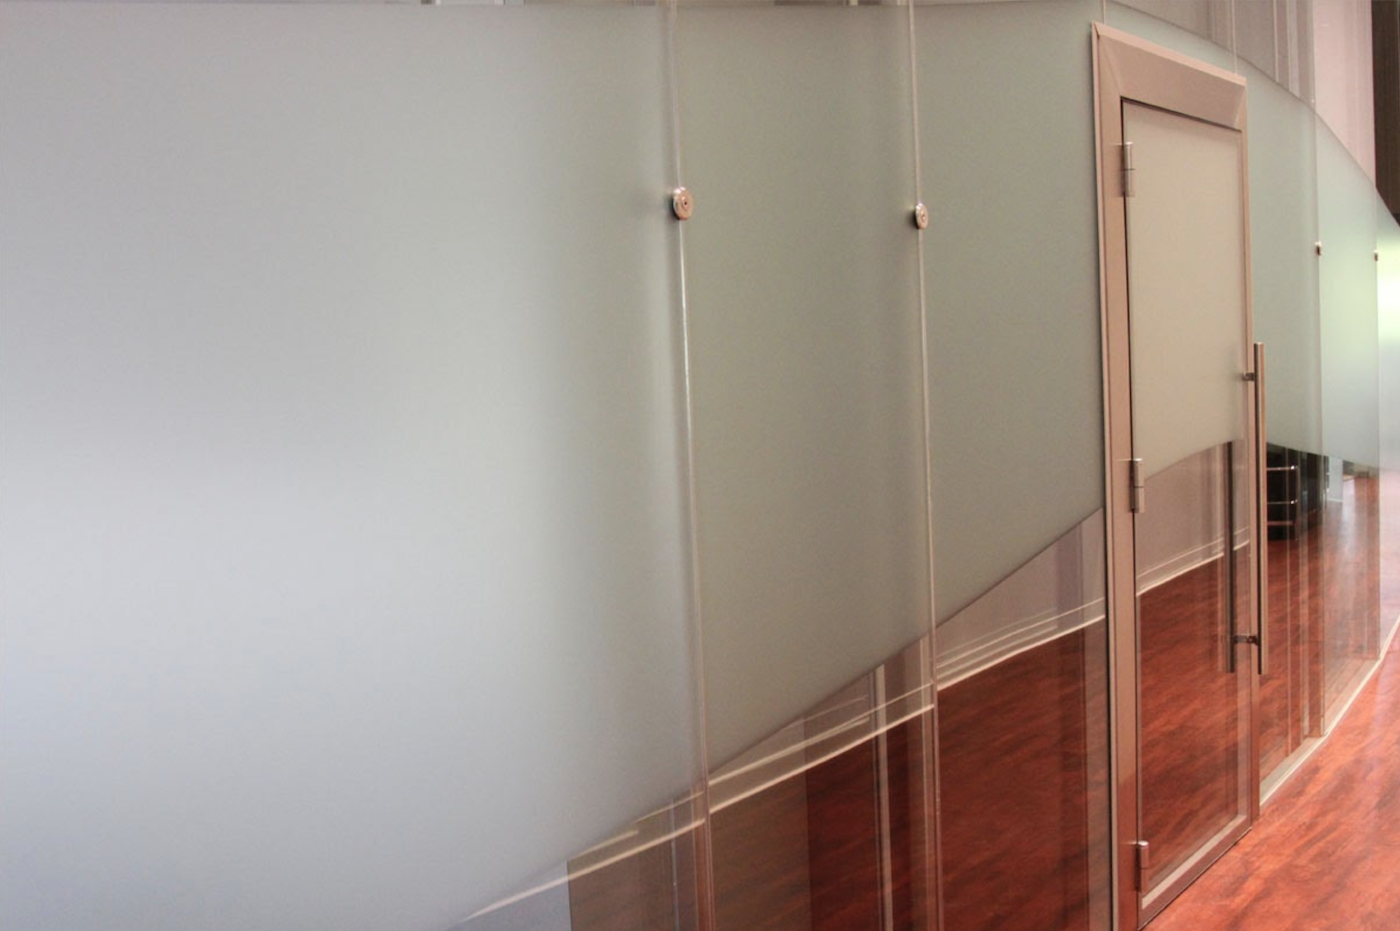 Acoustic double glazed doors can be fitted with hinges or pivots